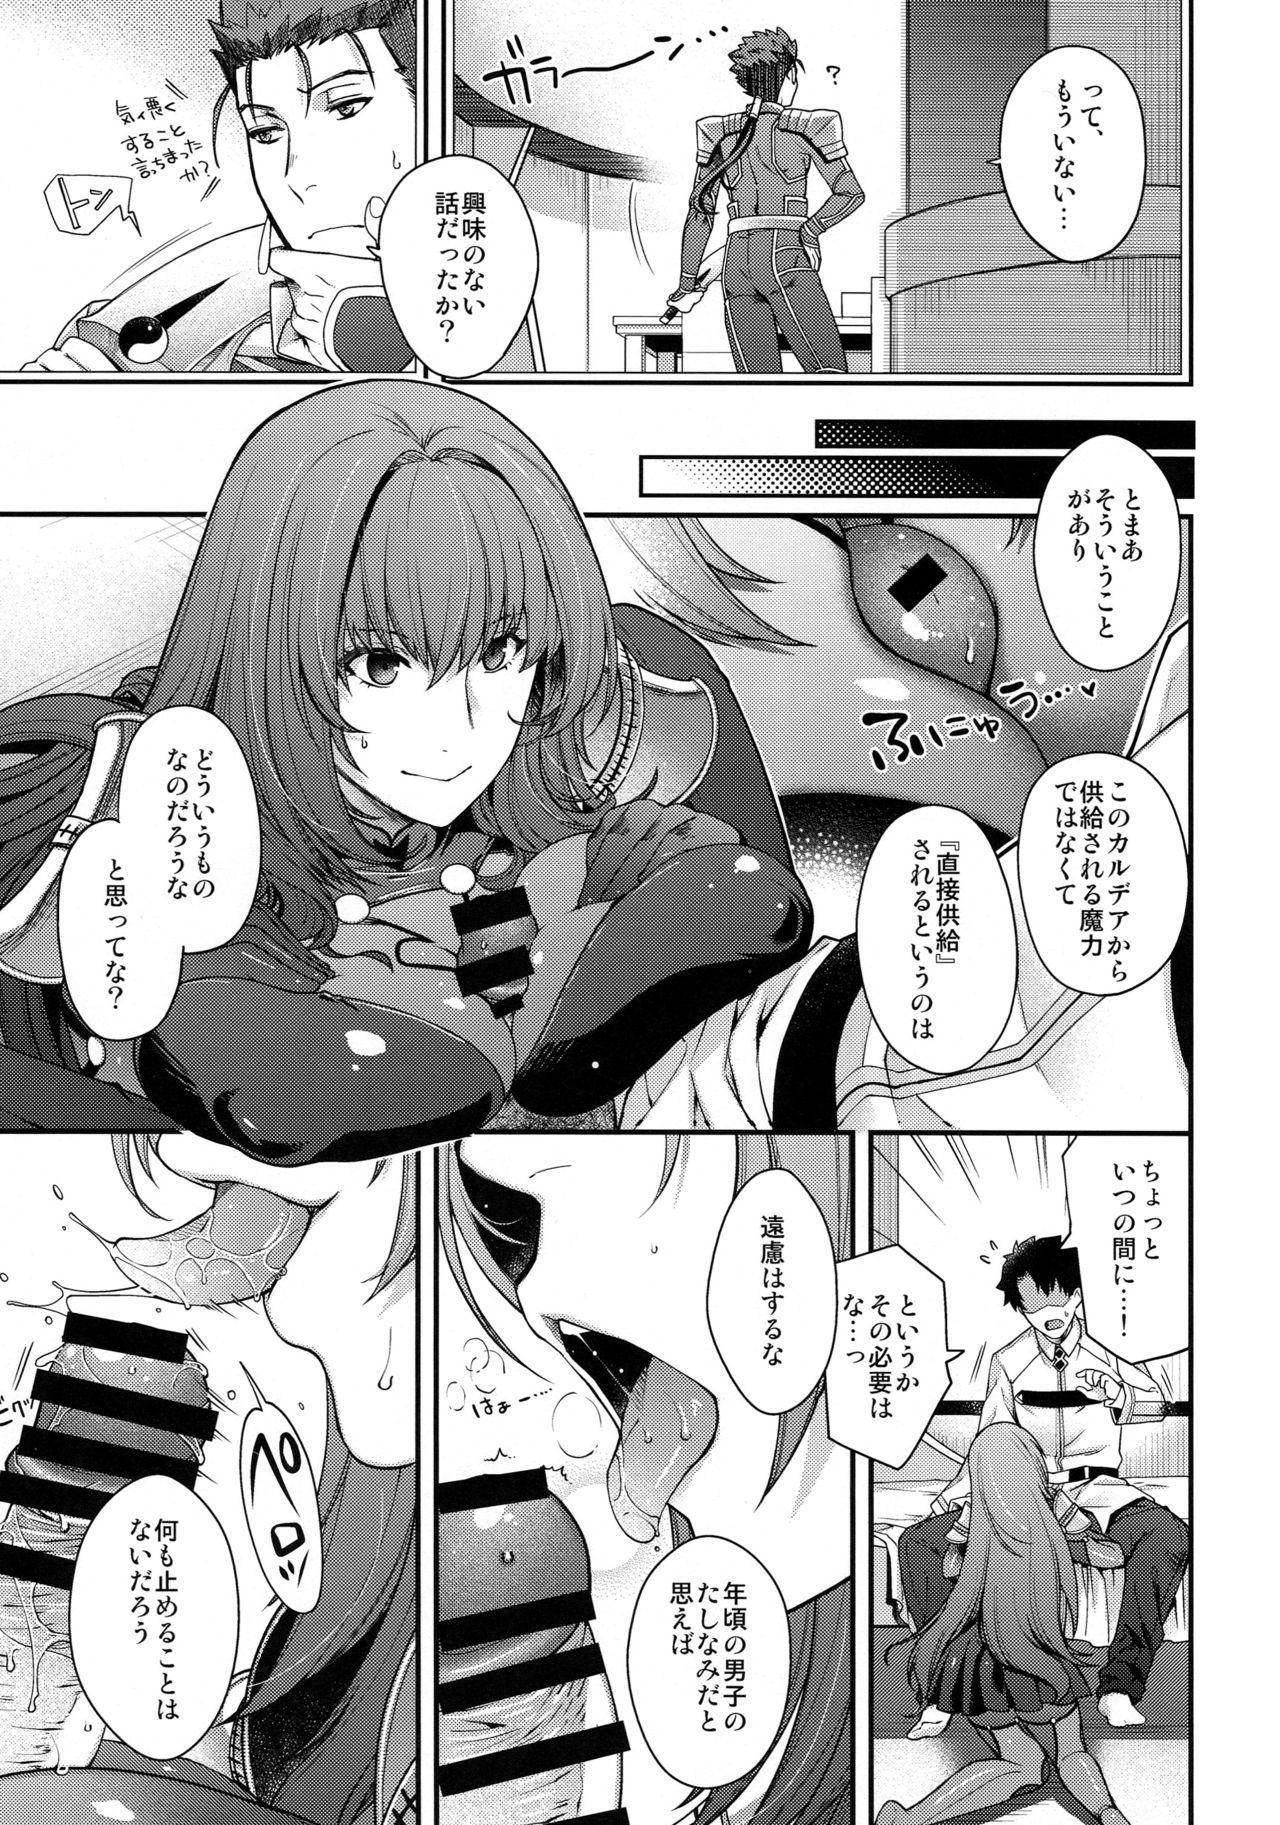 Milf Porn parthas - Fate grand order Throat - Page 6